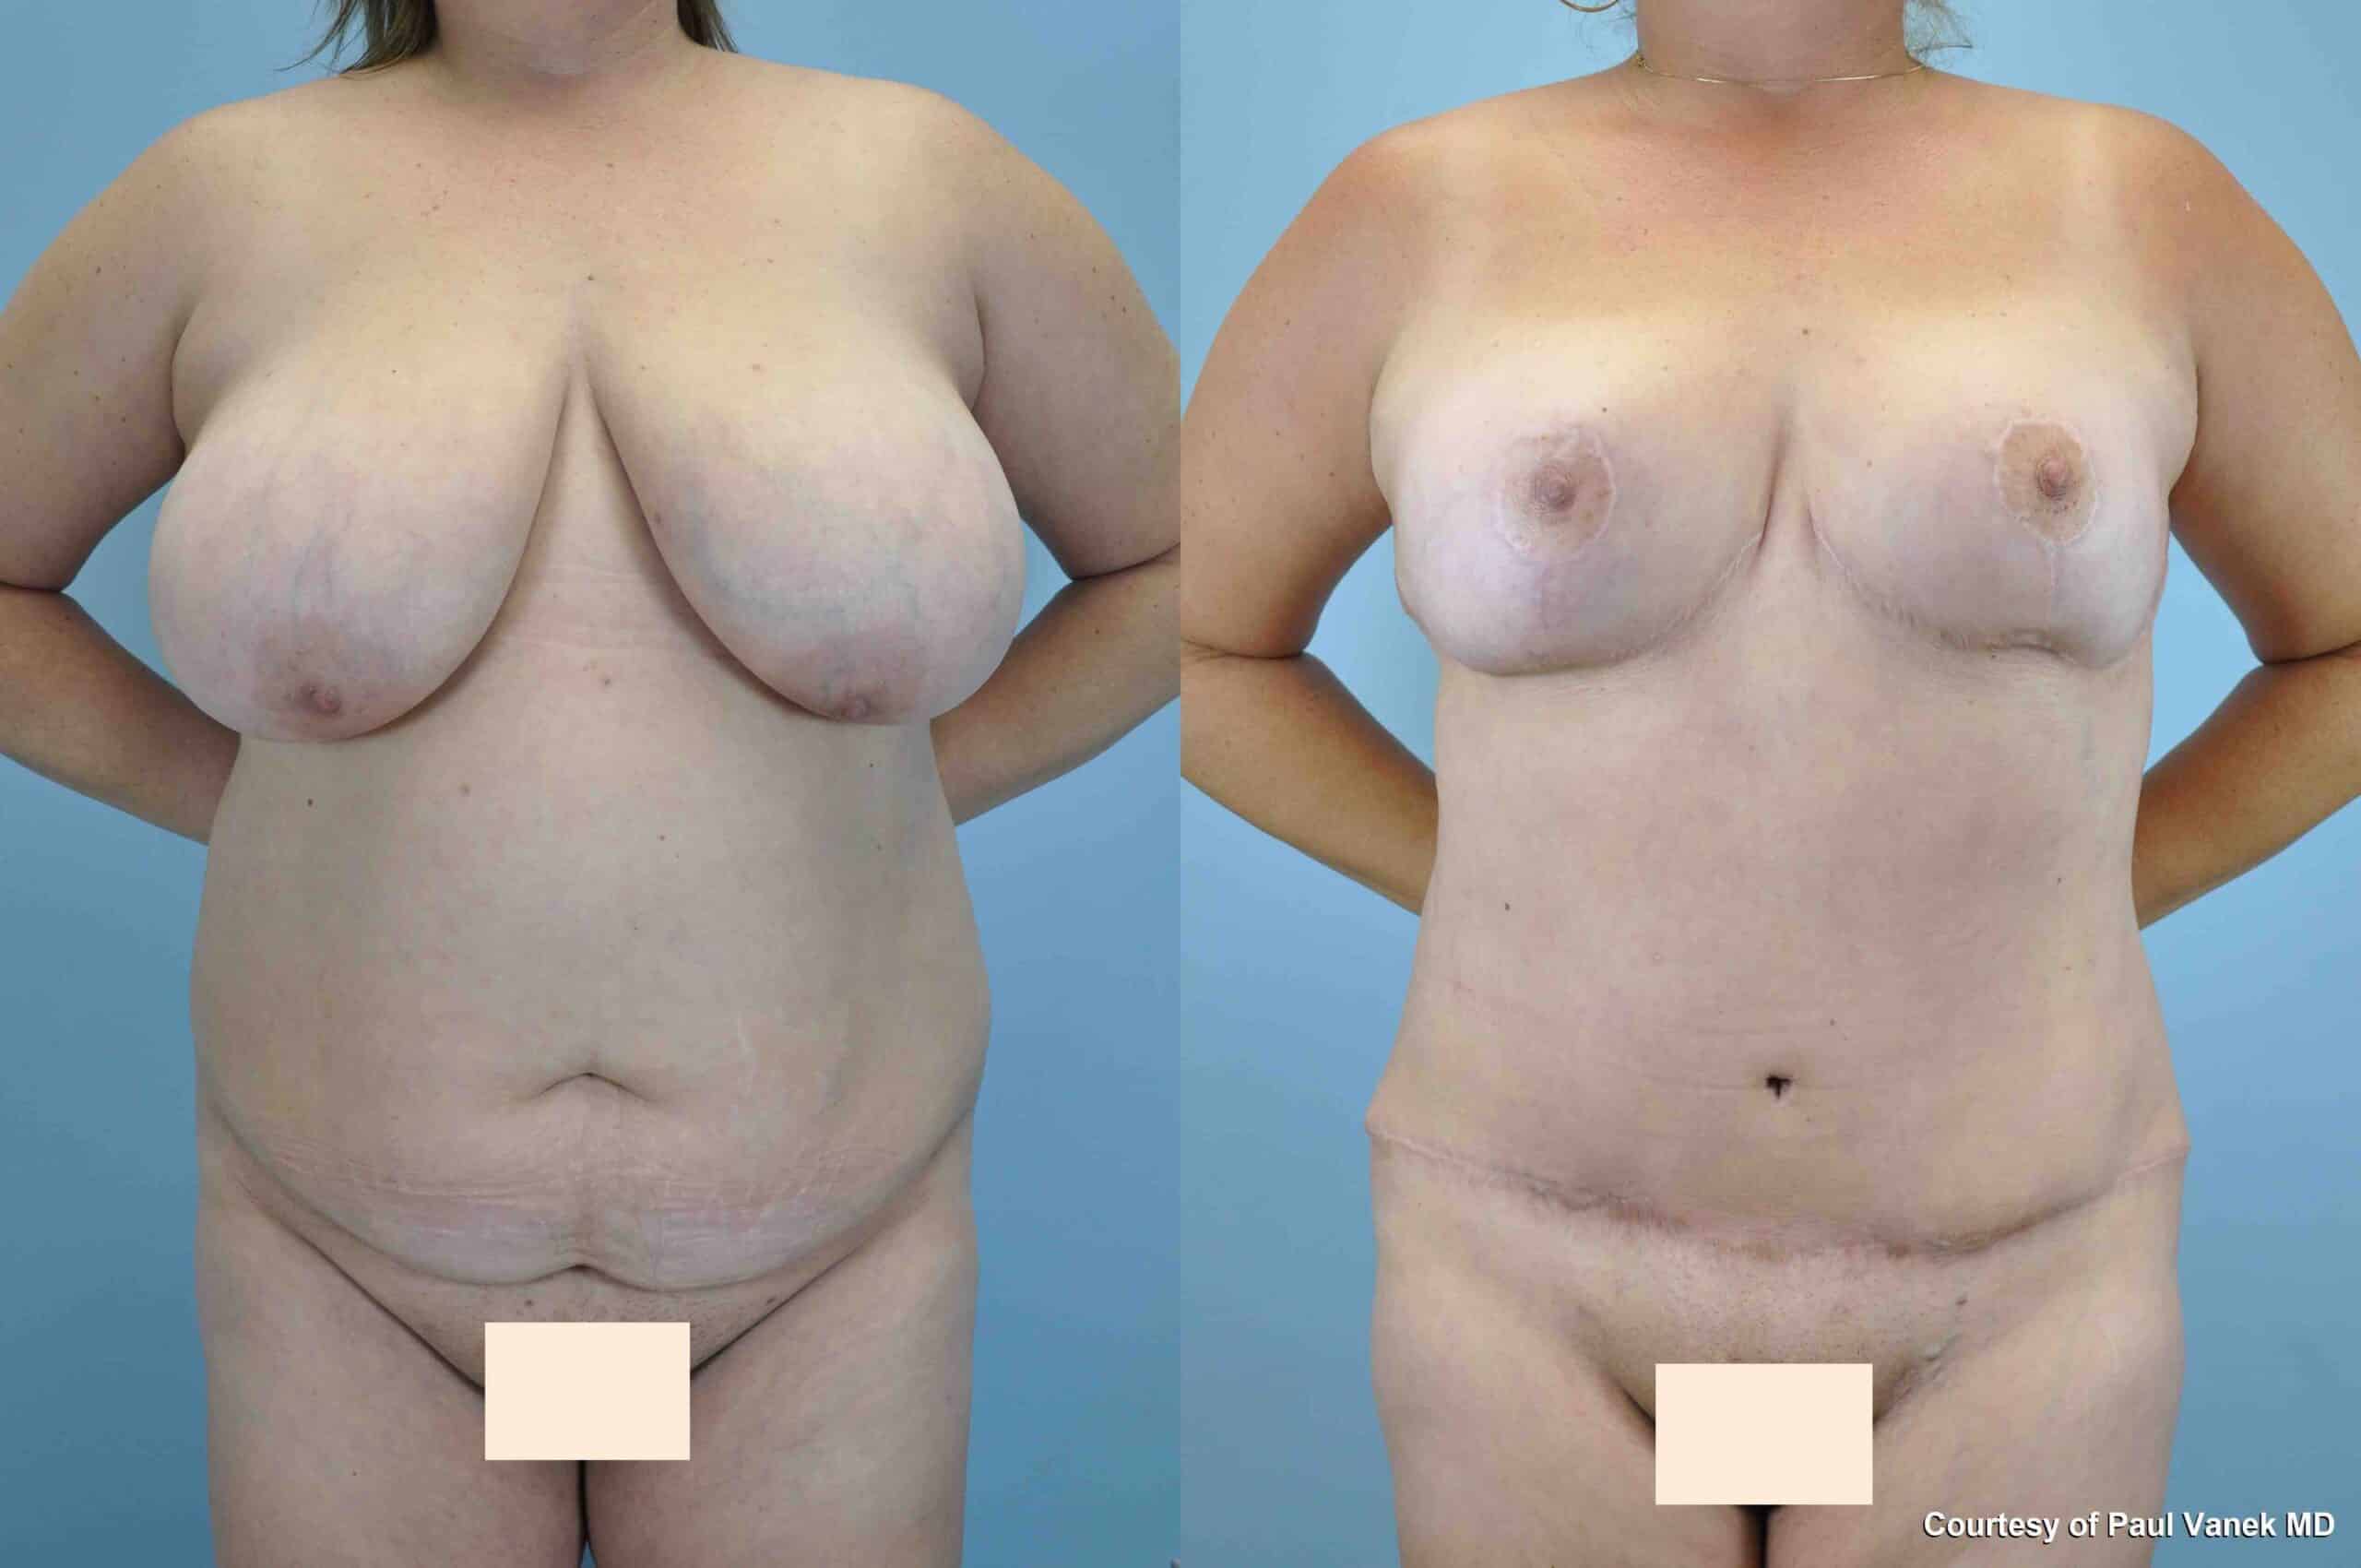 Before and after, patient 7 mo post op from Breast Reduction, Tummy Tuck, VASER Abdomen, Axilla Flanks, Back, Brazilian Butt Lift procedures performed by Dr. Paul Vanek